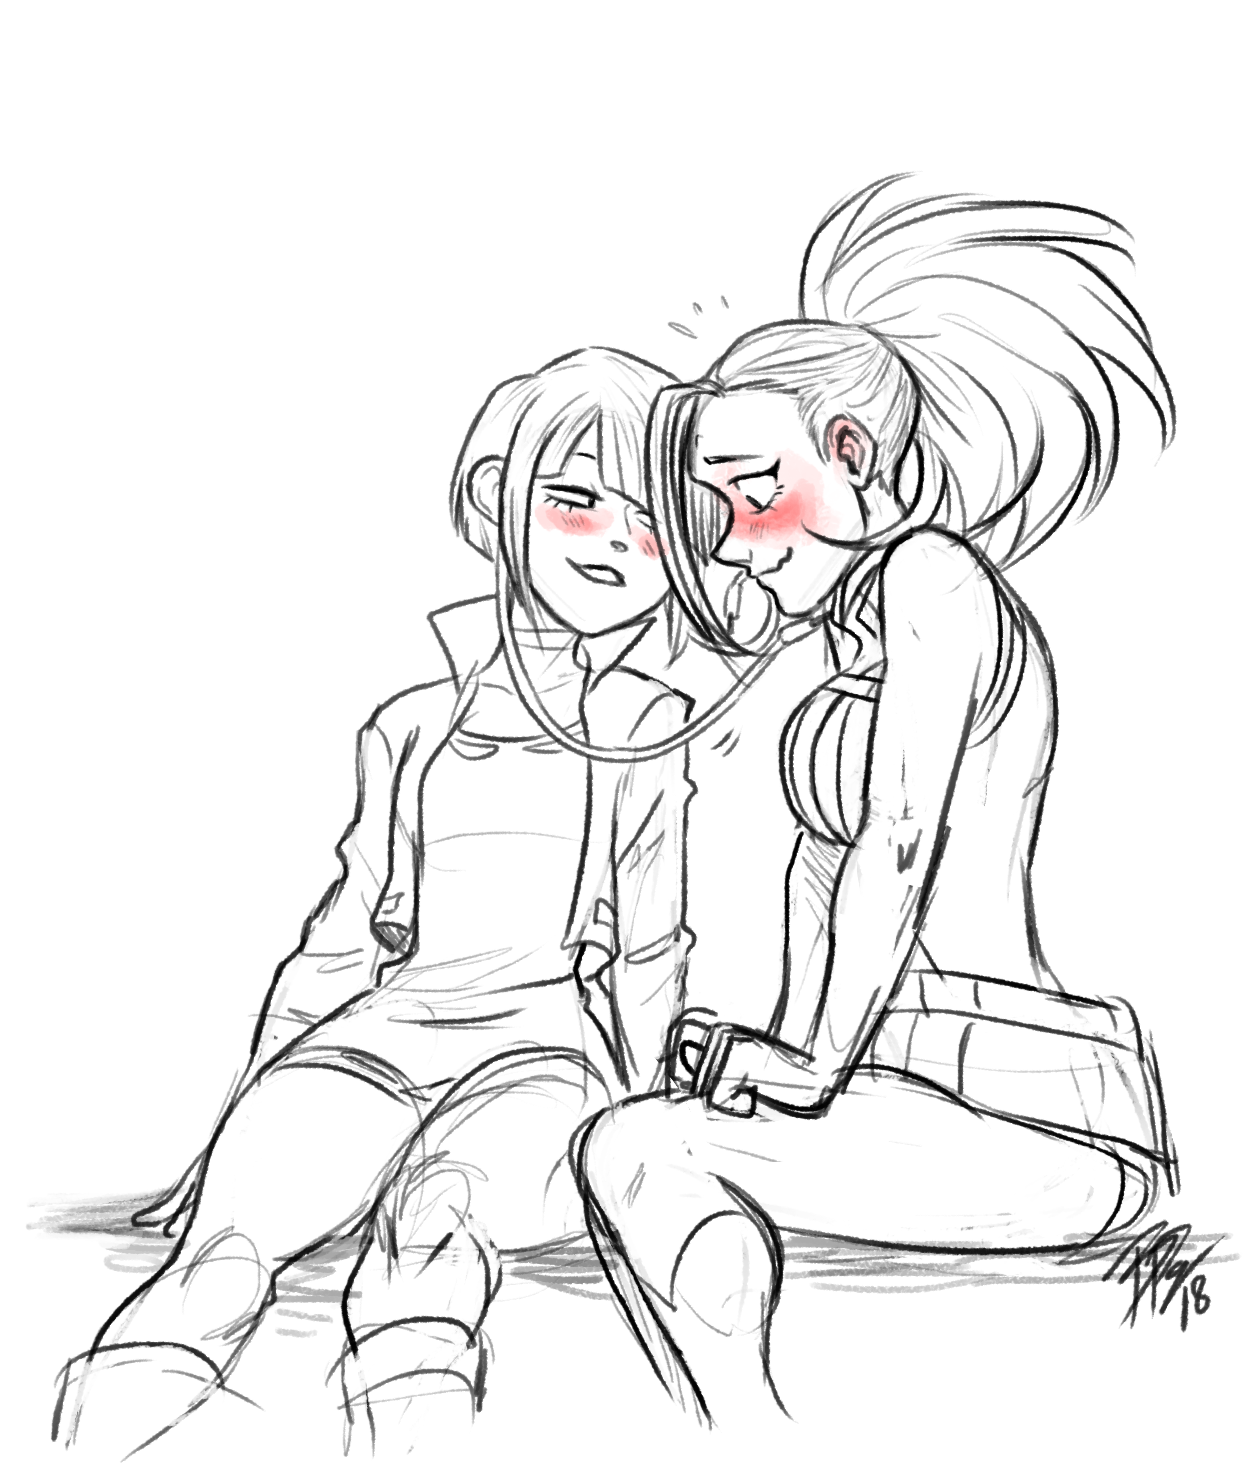 bonkalore: *whispers sweet sapphic things* So I may ship these 2 a bit?? They cute.